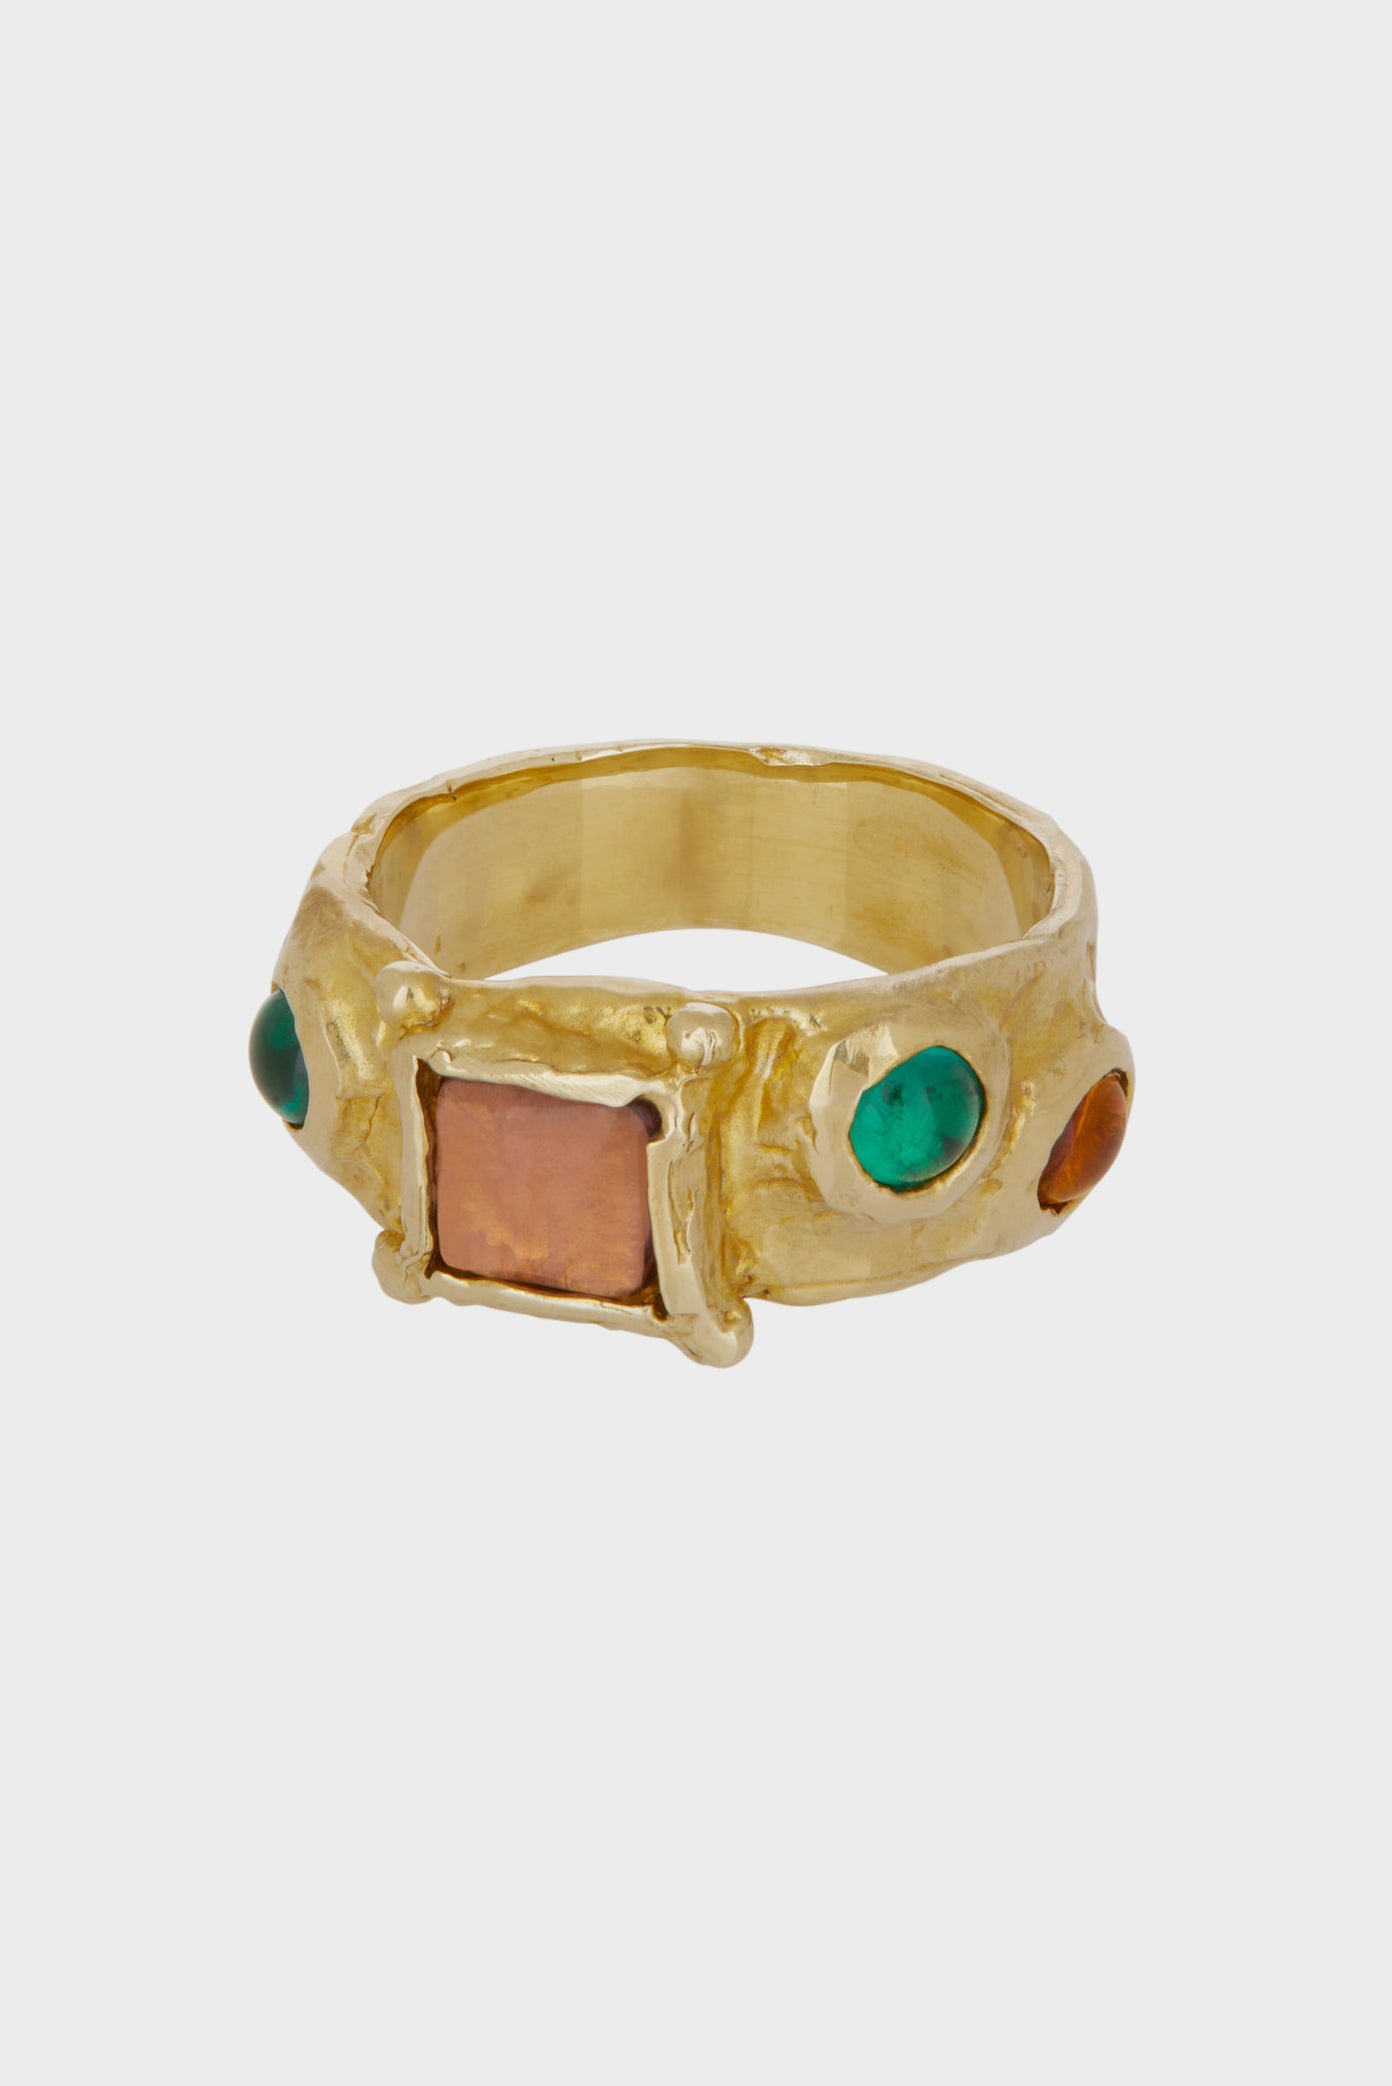 Suede Ring in Brass - Lavender, Green & Yellow